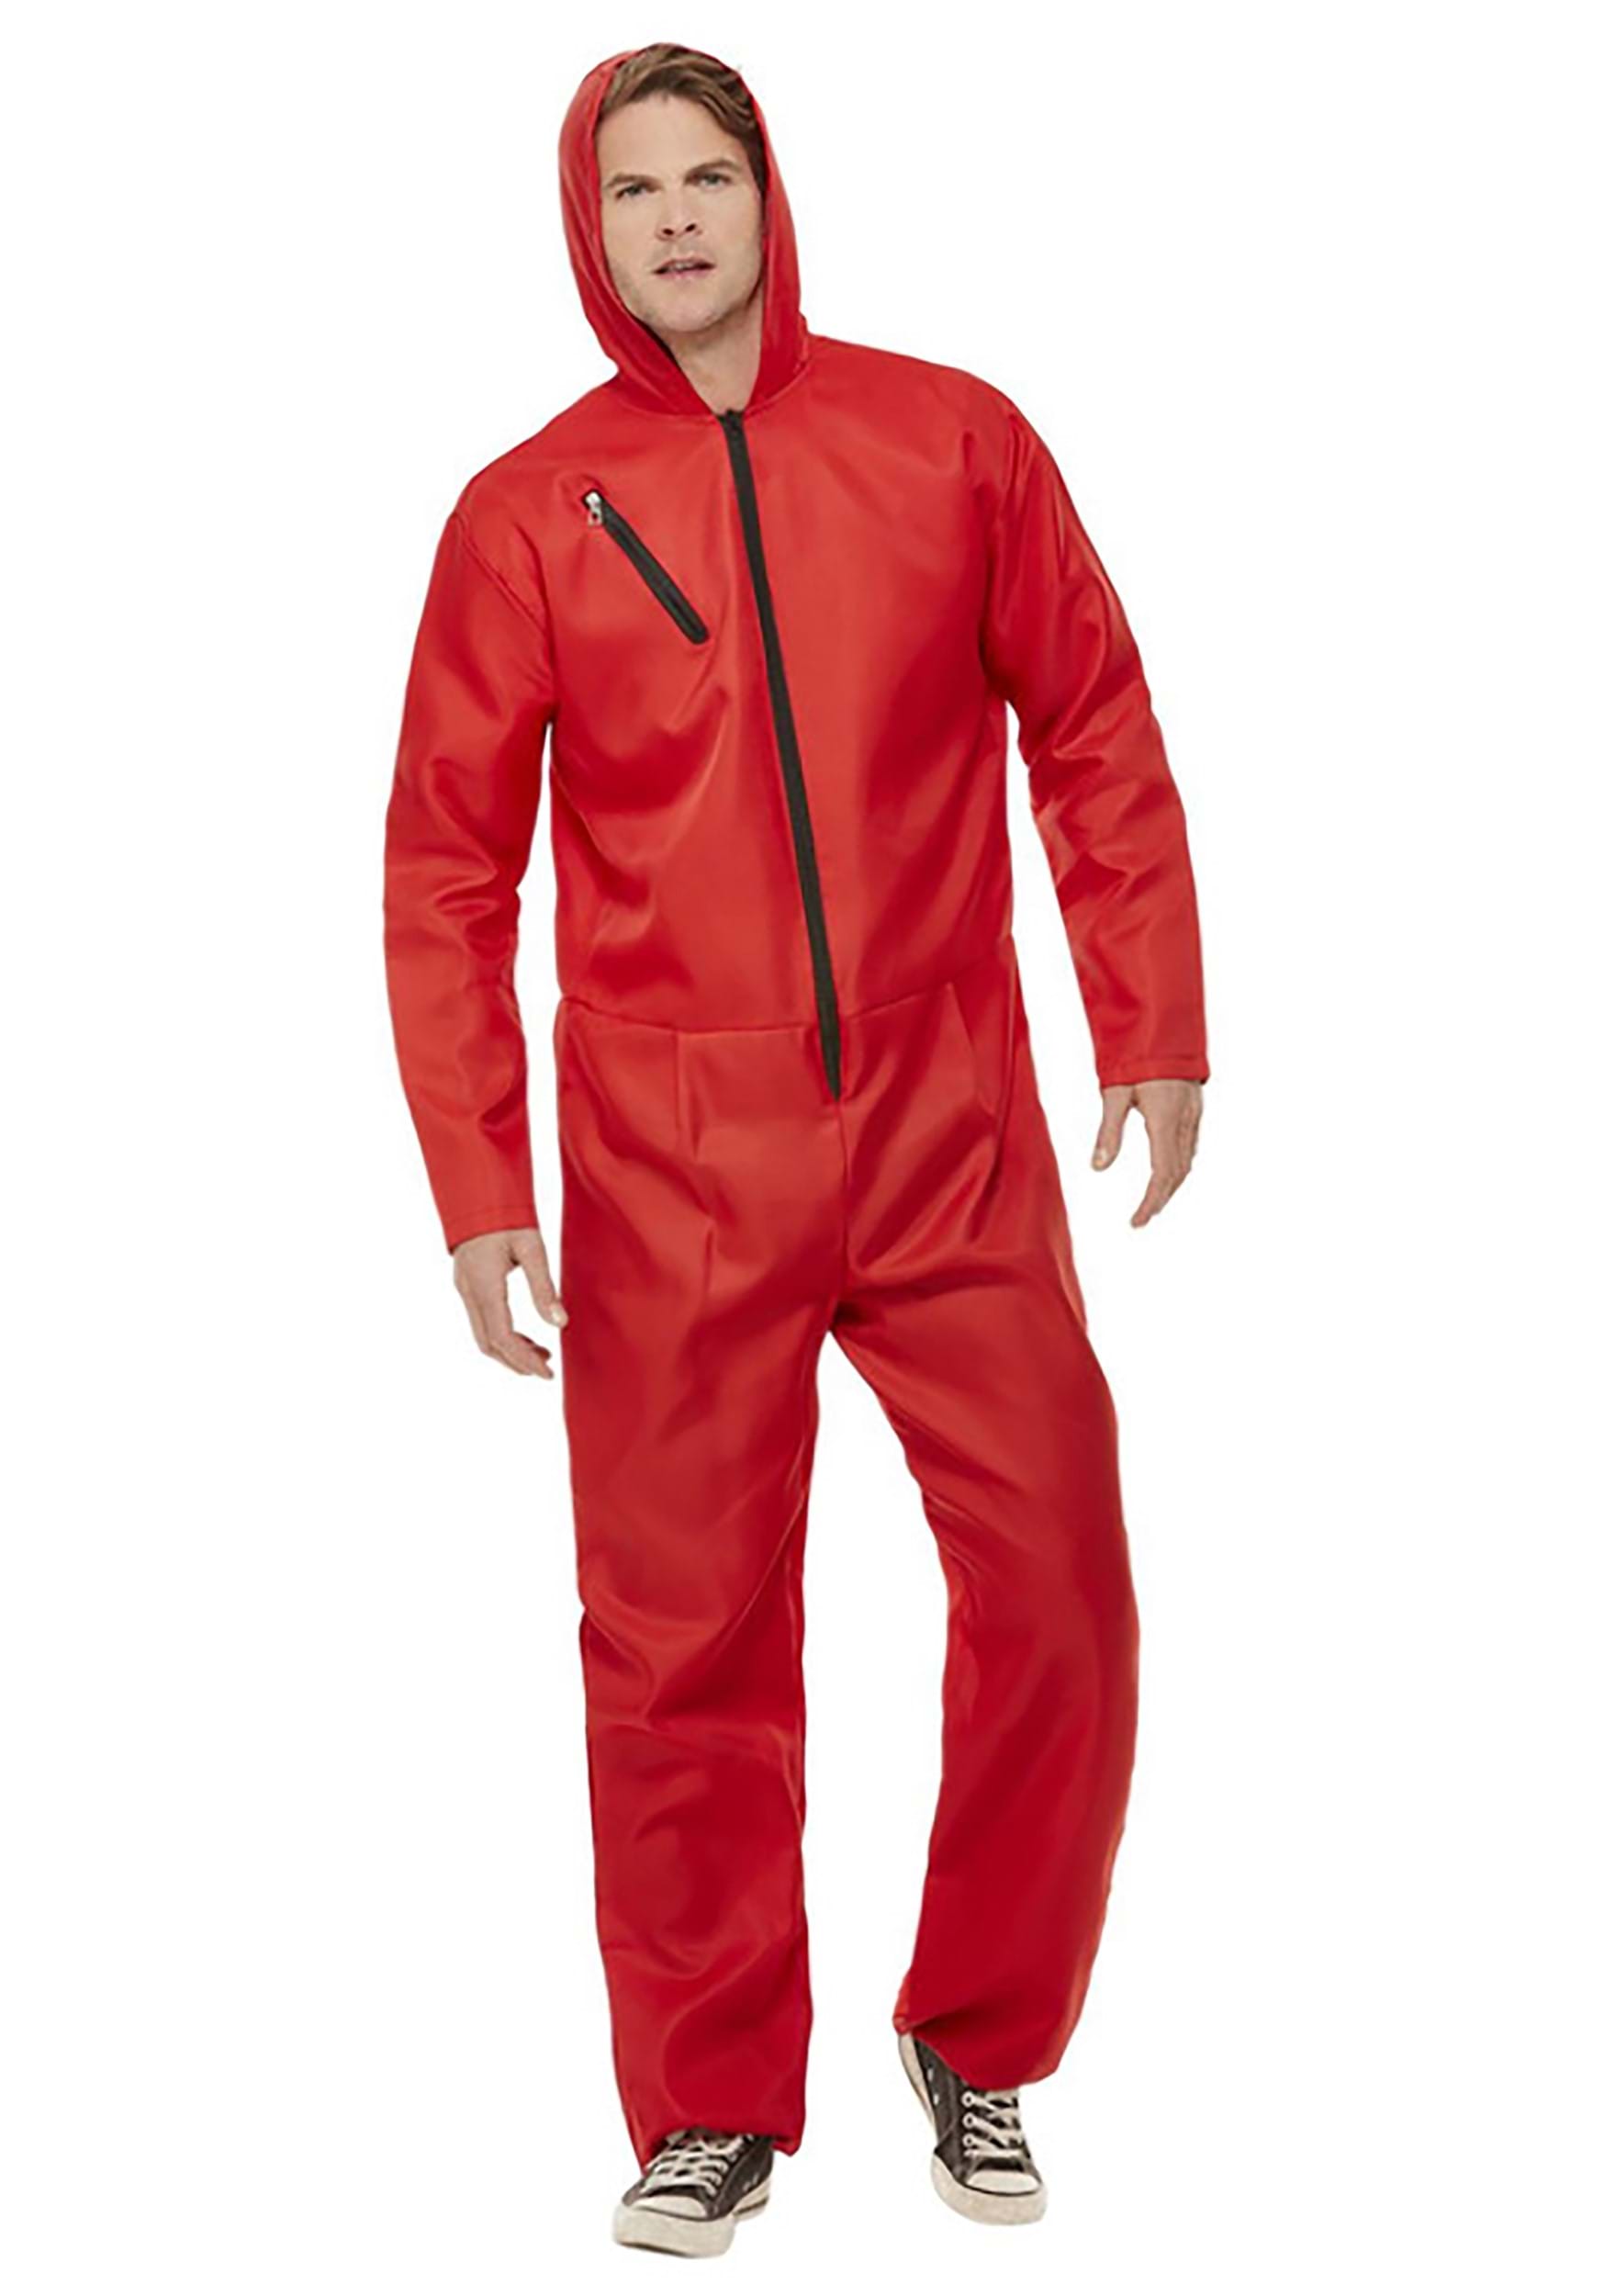 Heist Red Jumpsuit Salvador Dali Money Costume Fancy Dress Xl Costume Mask  And Gloves - Fancy Dress Costumes - Countyfetes